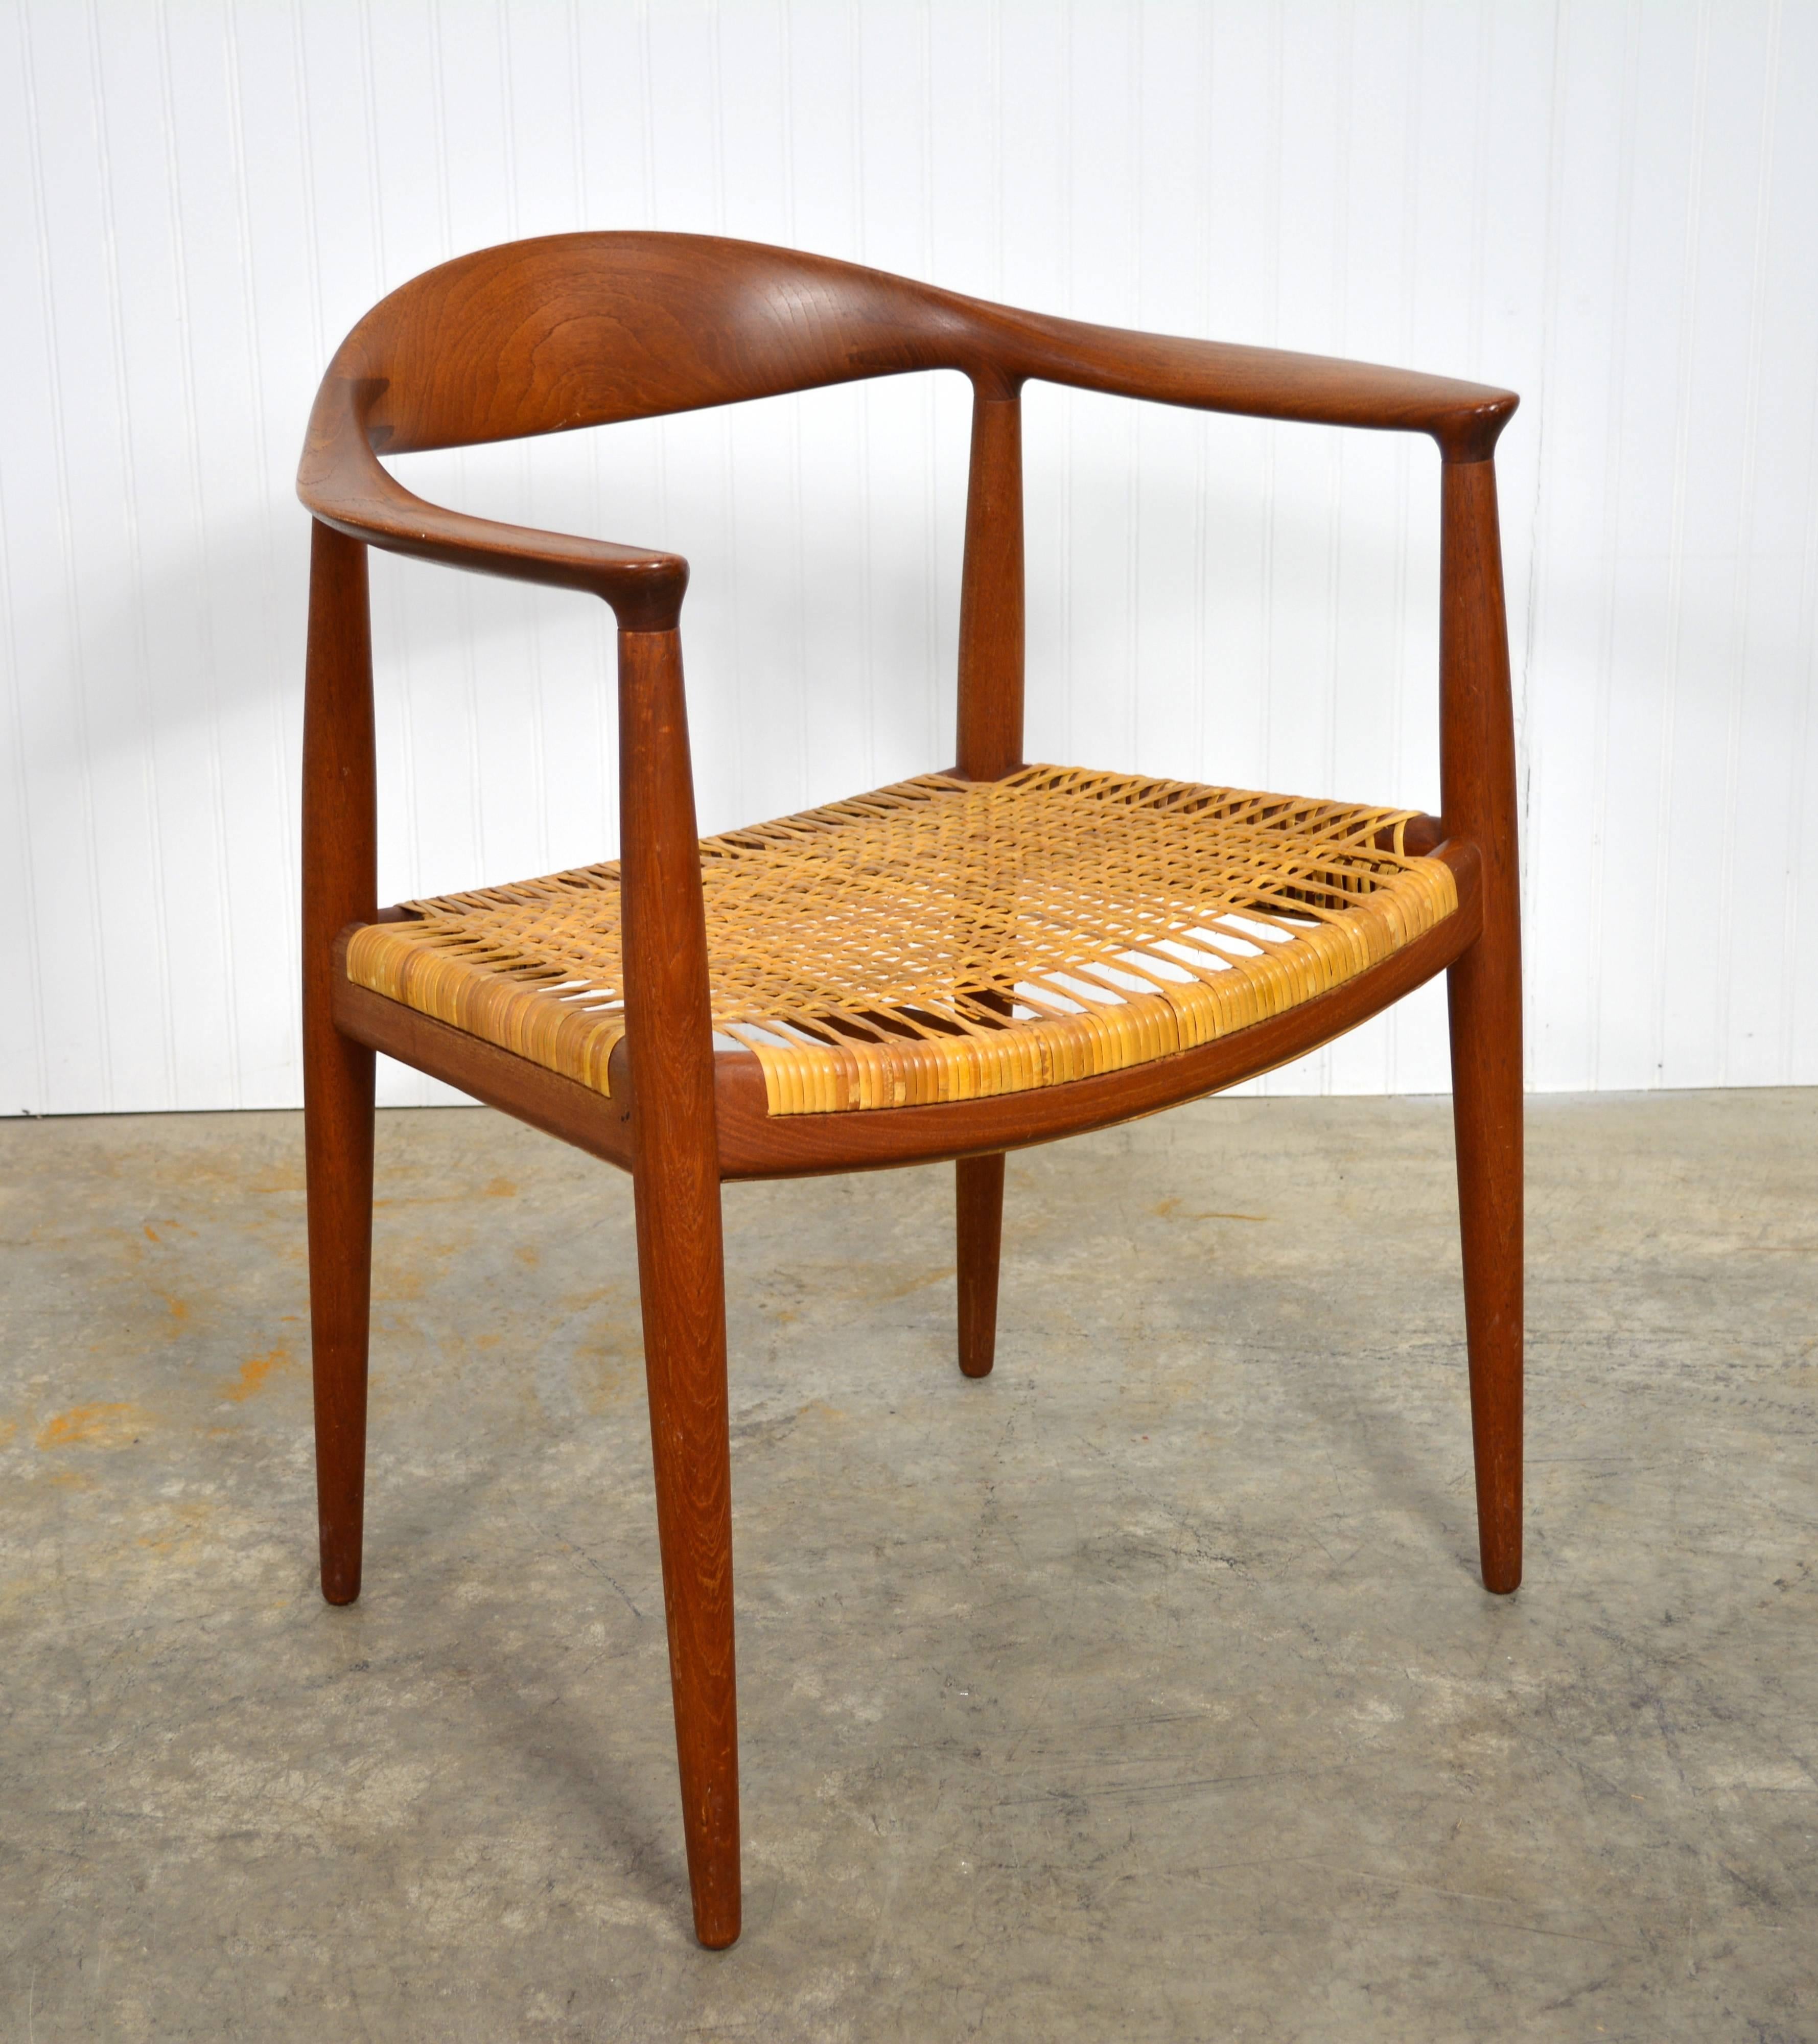 A set of four "Round" chairs designed by Hans Wegner. Solid teak frames and caned seats. All four a stamped with the maker's mark. Very minor wear to caning.